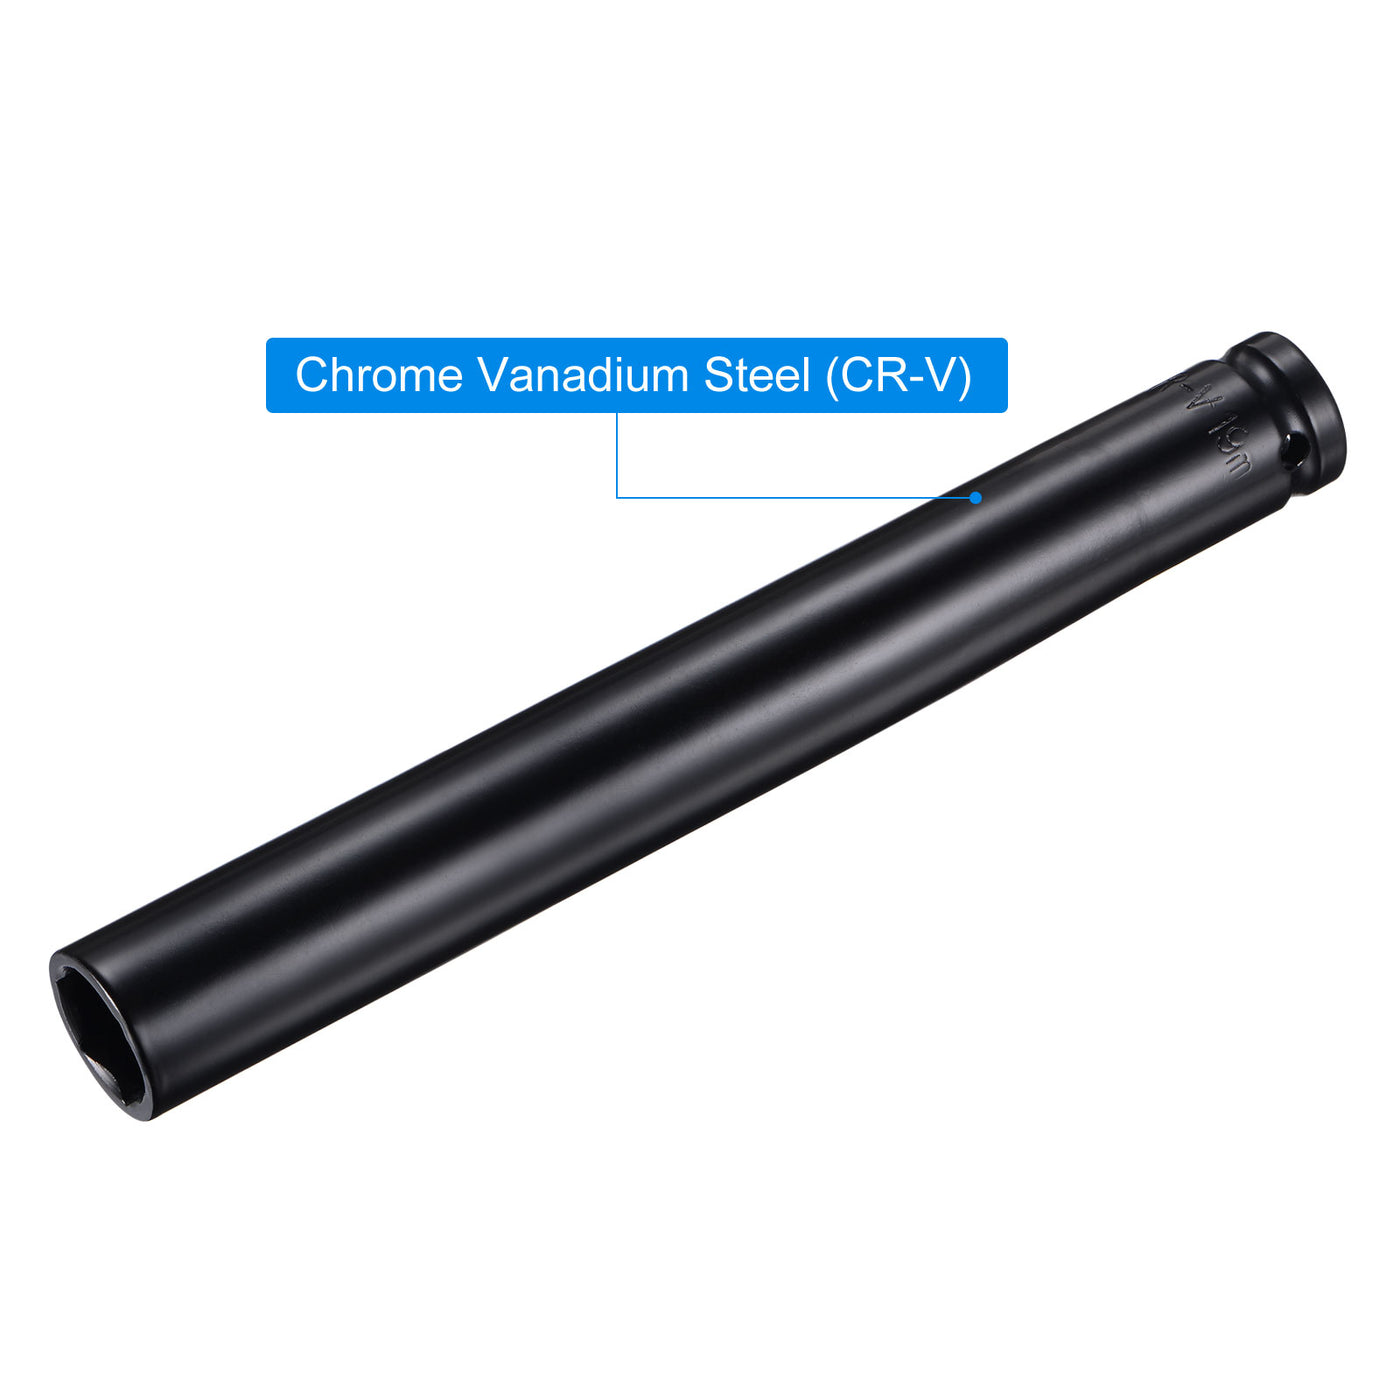 uxcell Uxcell Deep Impact Socket, CR-V Steel, 6-Point Metric Sizes